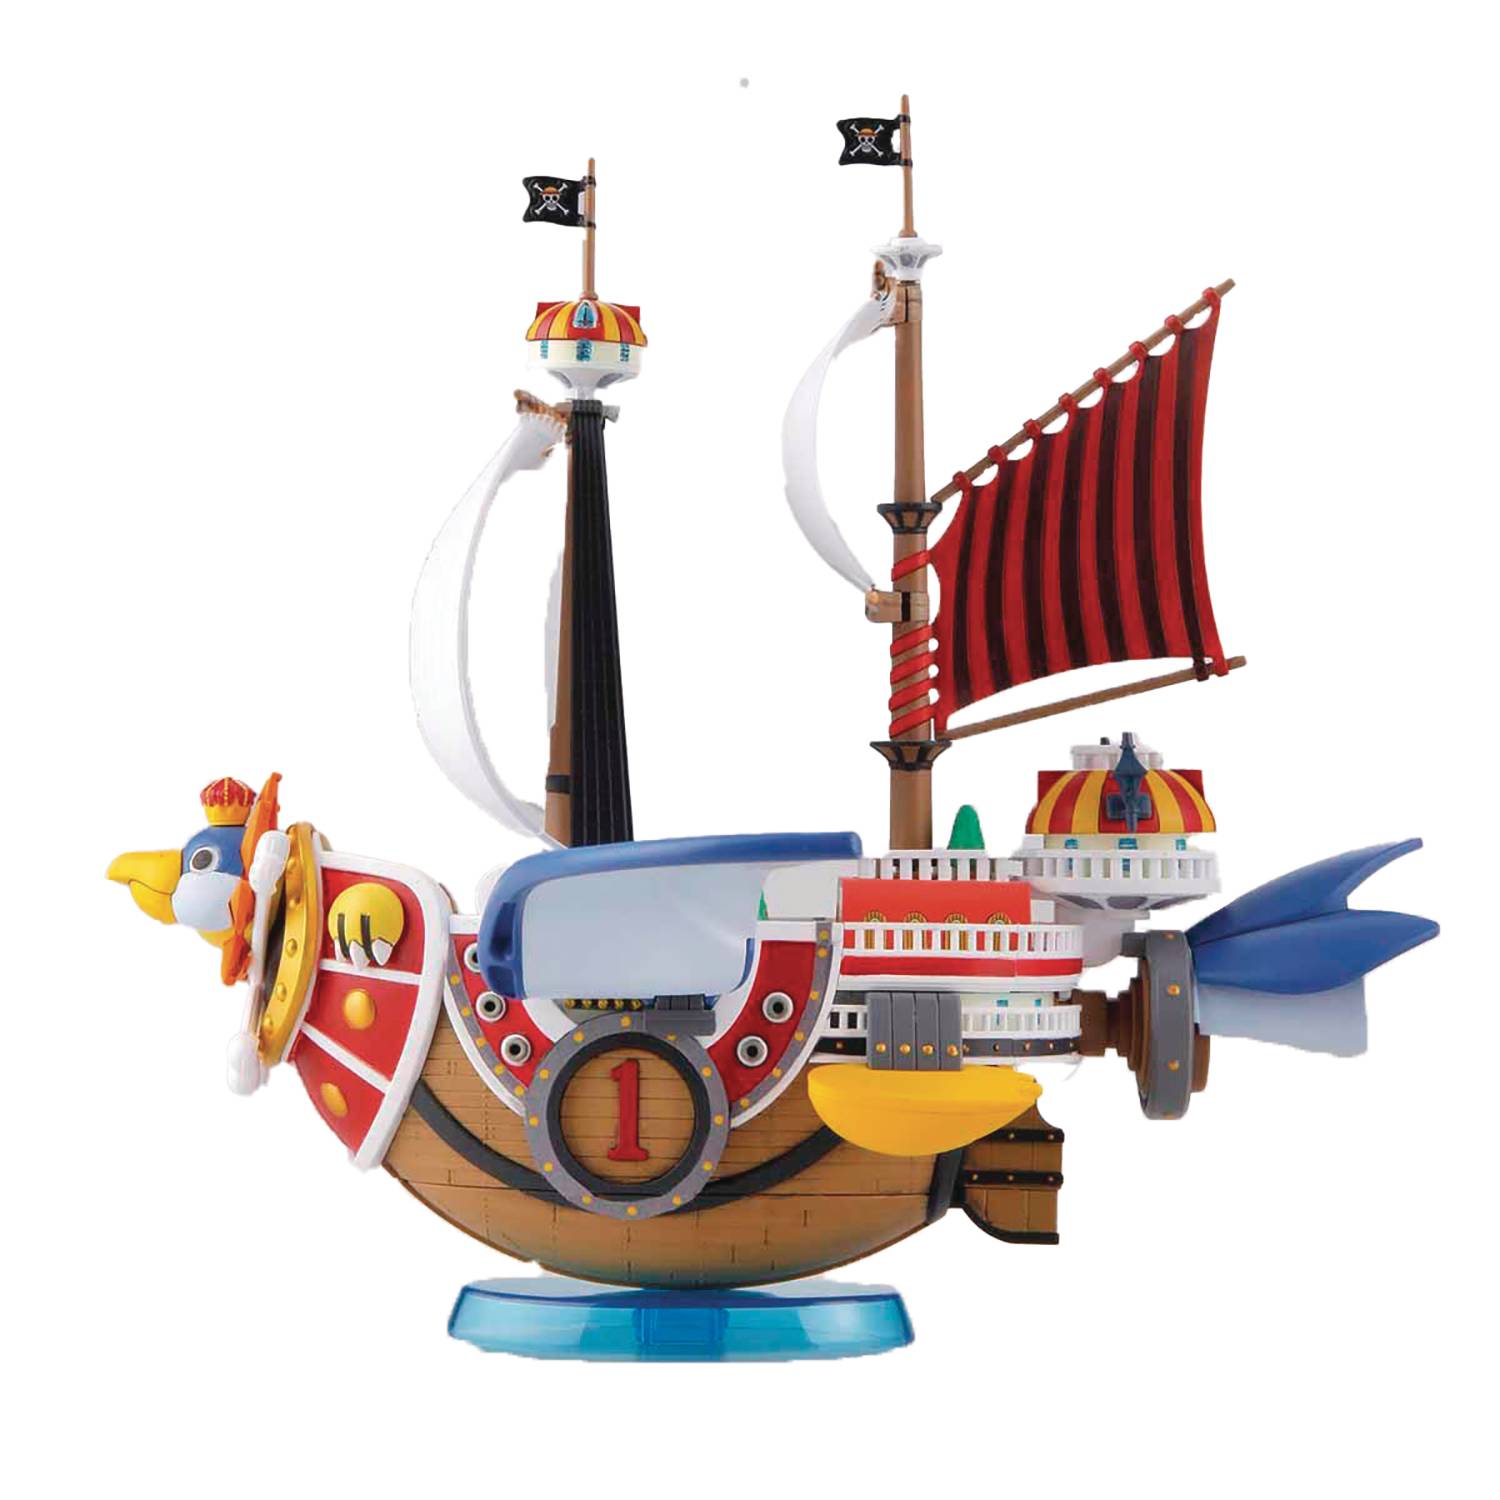 AUG238129 - ONE PIECE GRAND SHIP COLL THOUSAND SUNNY FLYING MDL KIT (NET -  Previews World